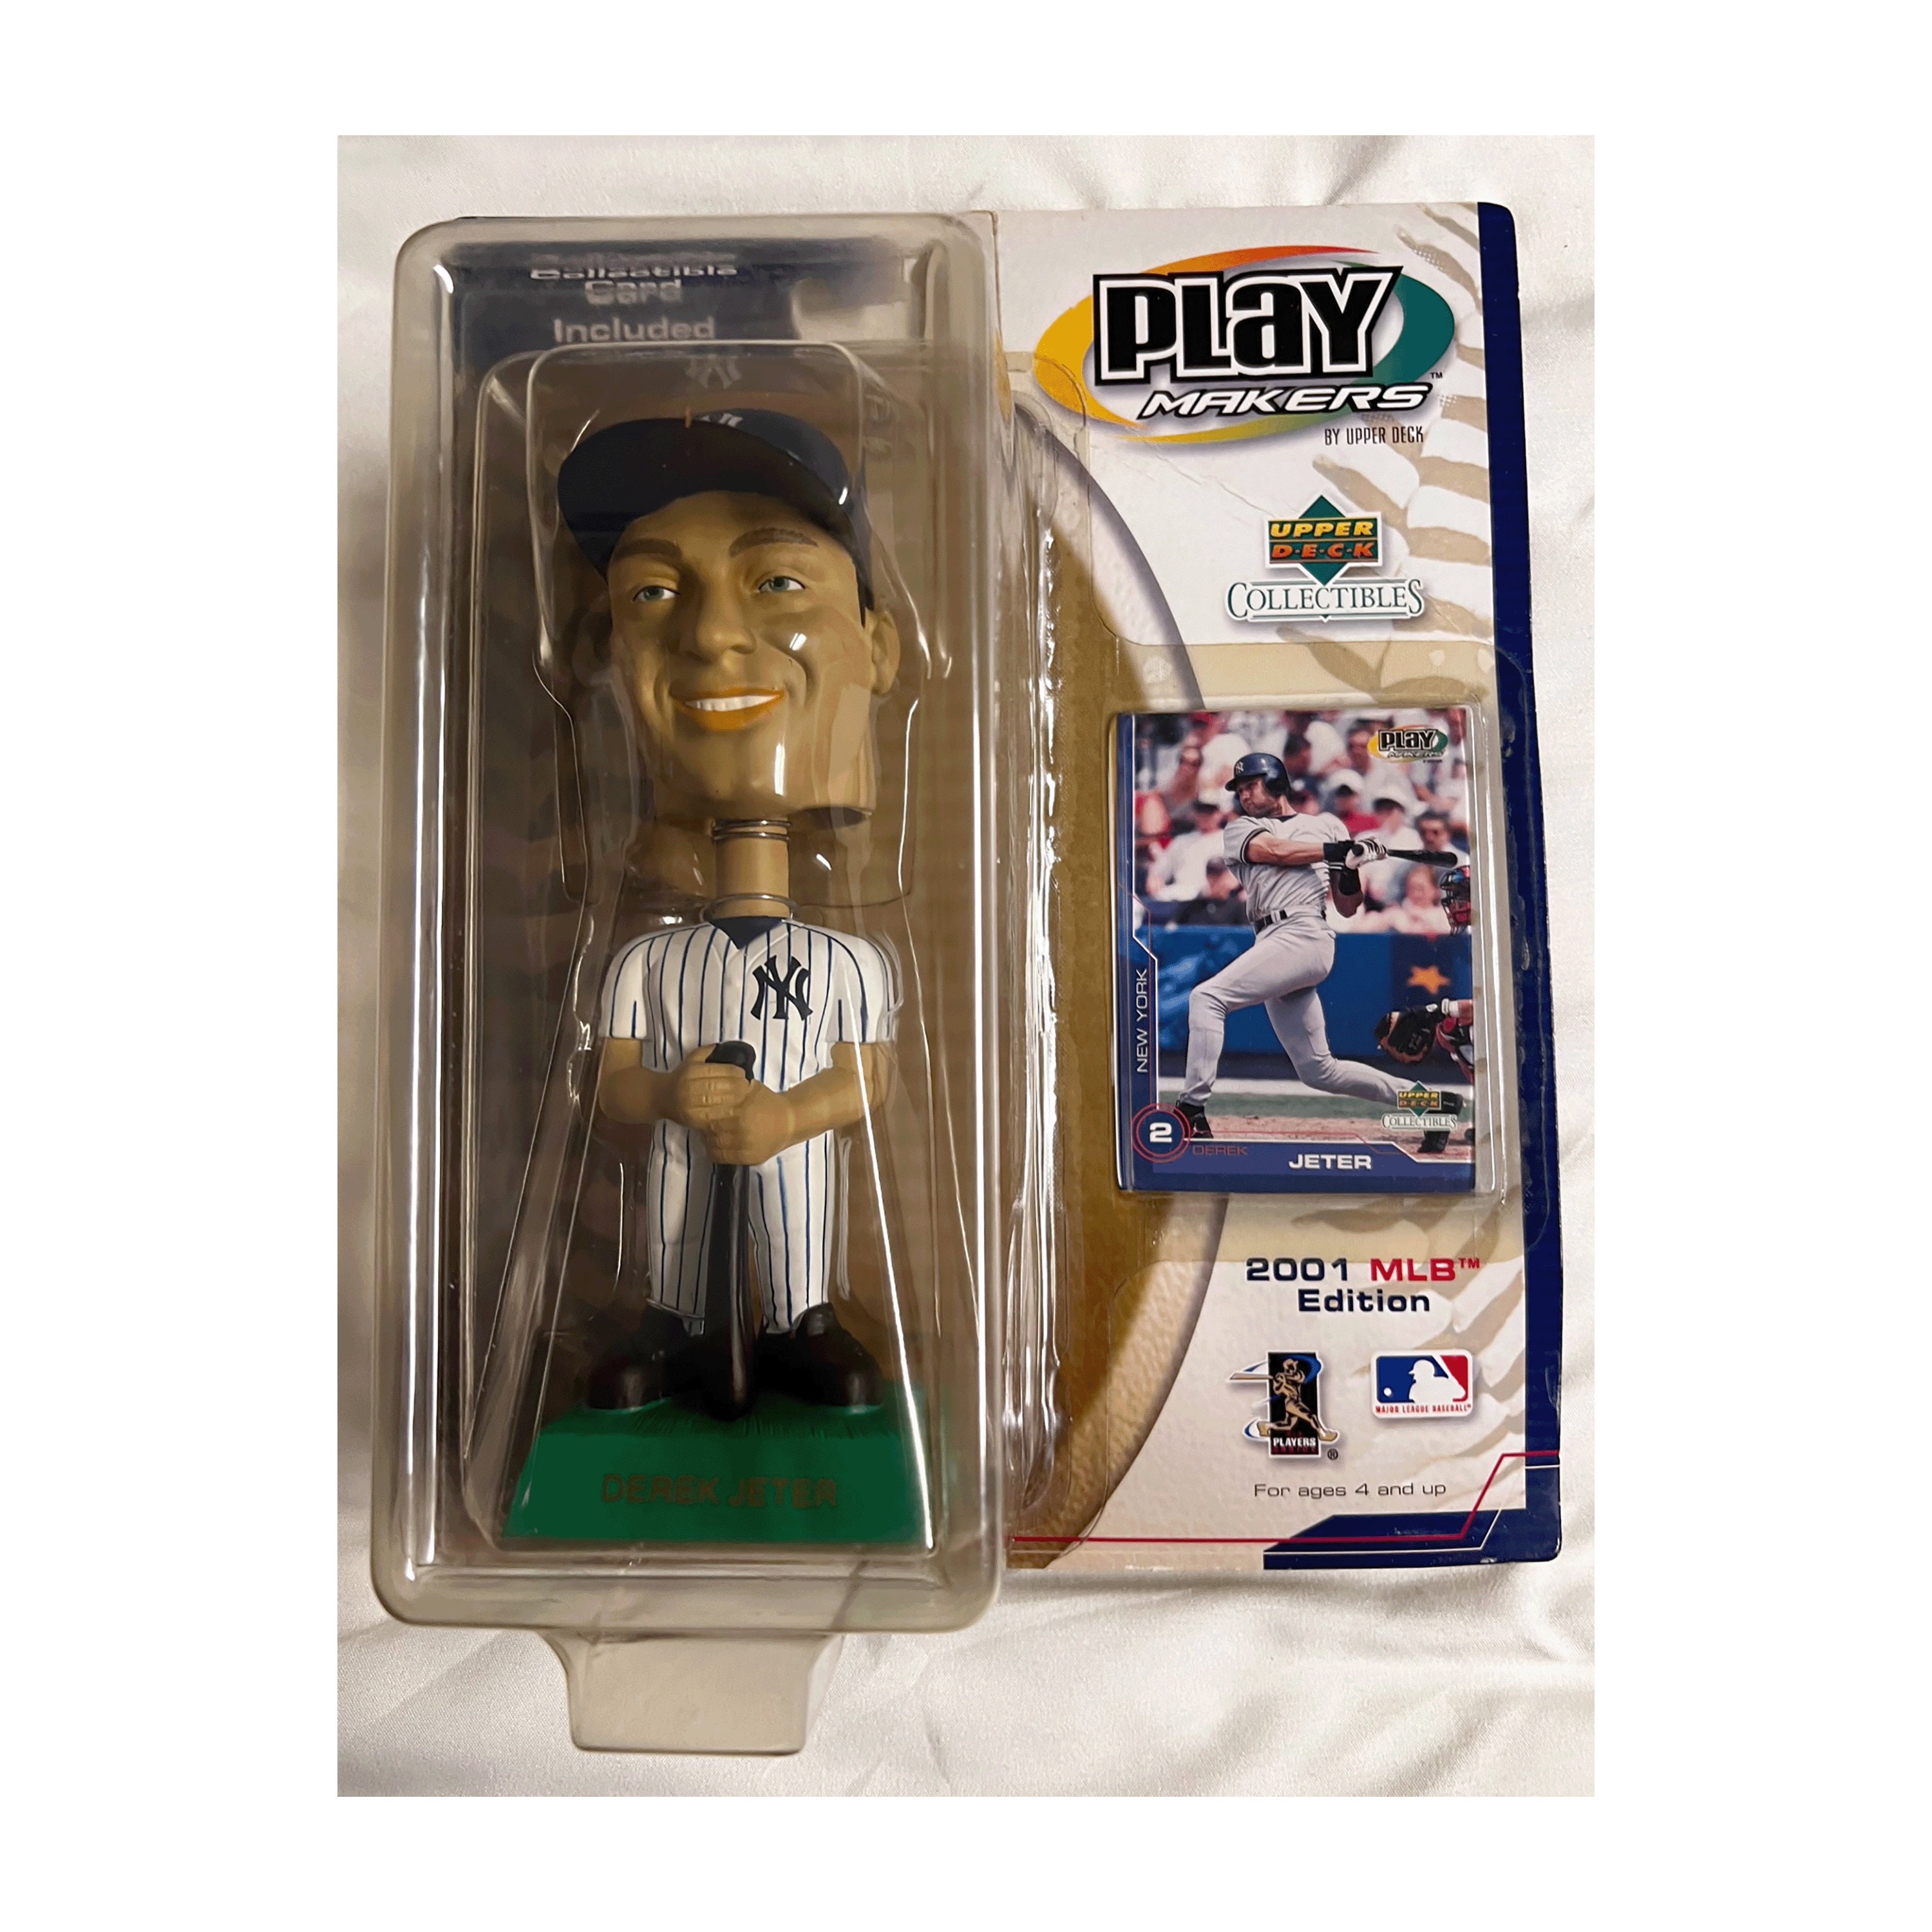 Derek Jeter Upper Deck Playmakers Bobble Head and Collectible 